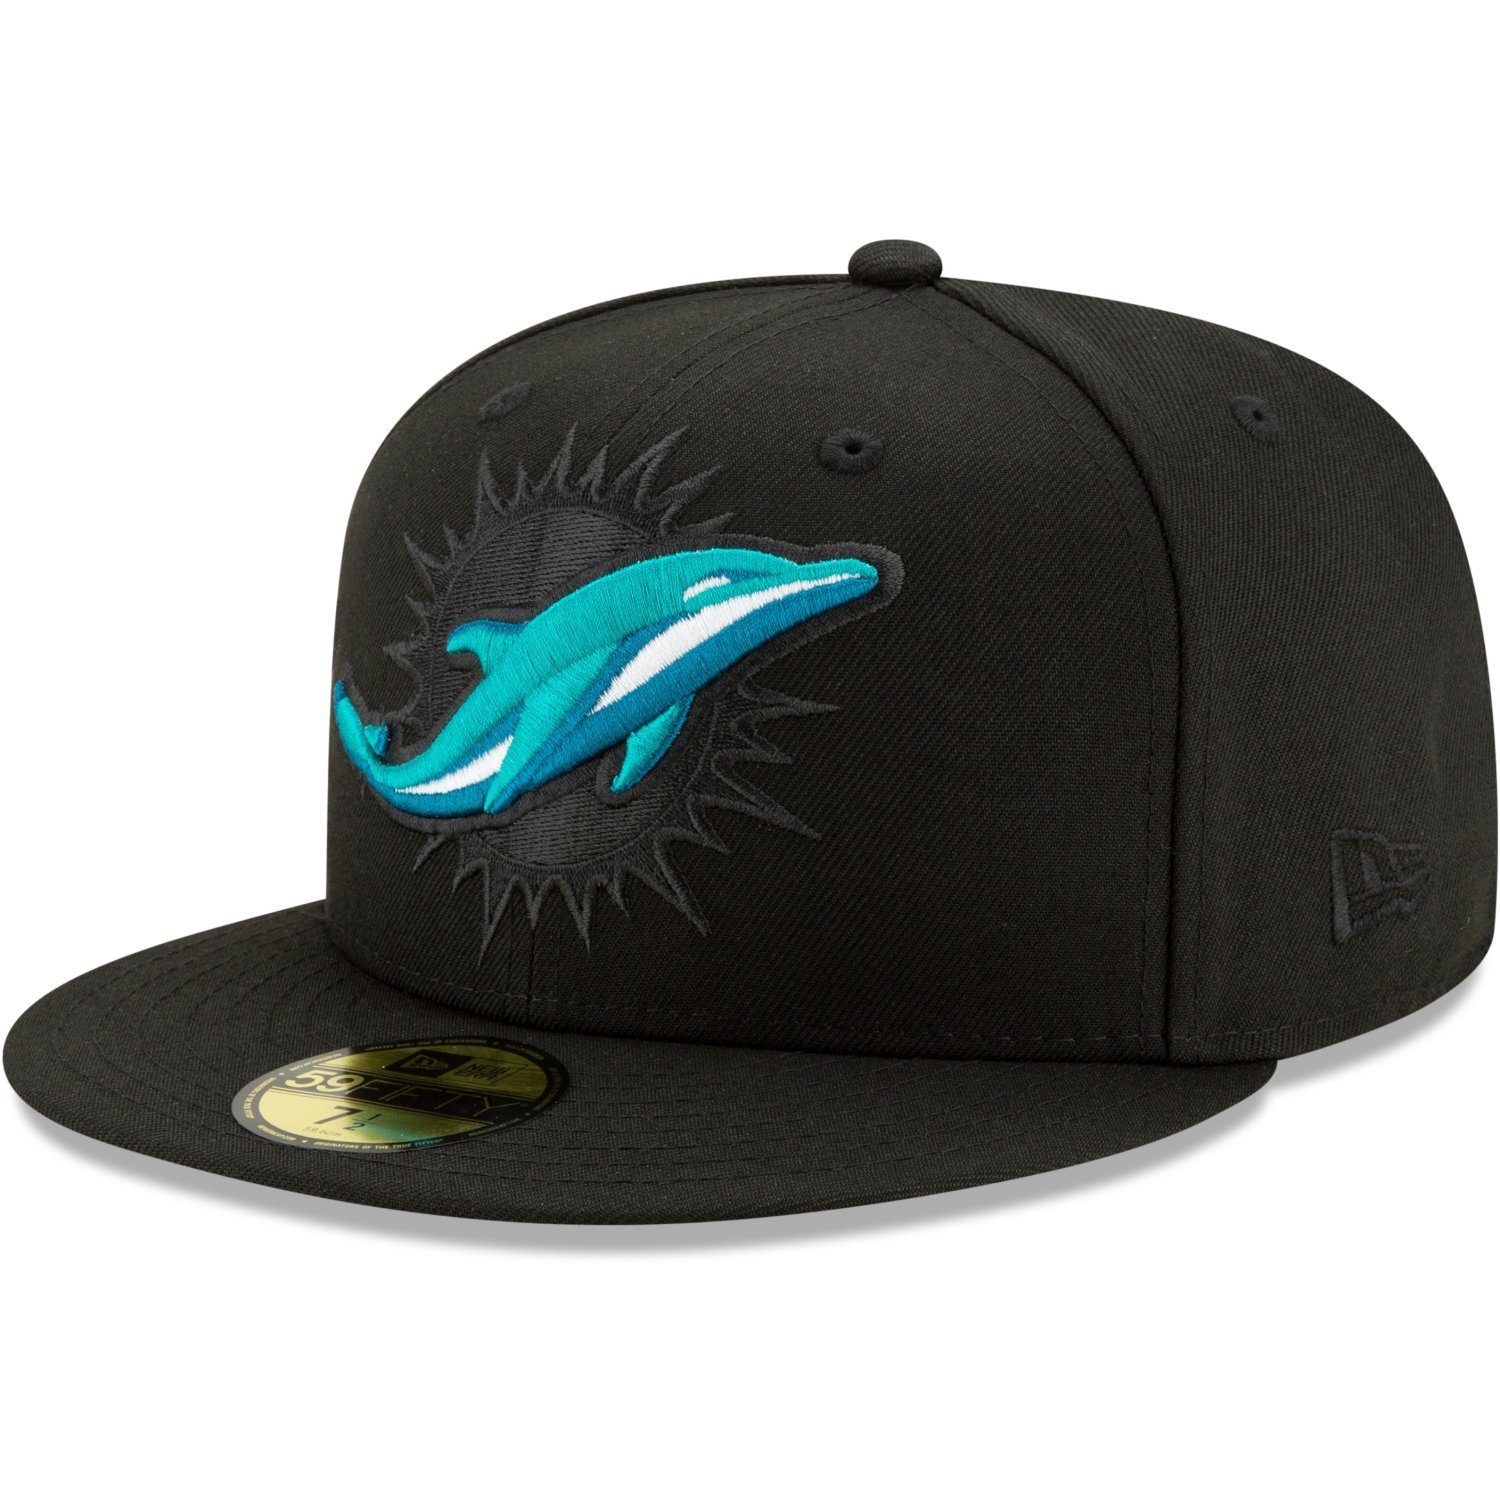 New Era Fitted Cap 59Fifty NFL ELEMENTS 2.0 Miami Dolphins